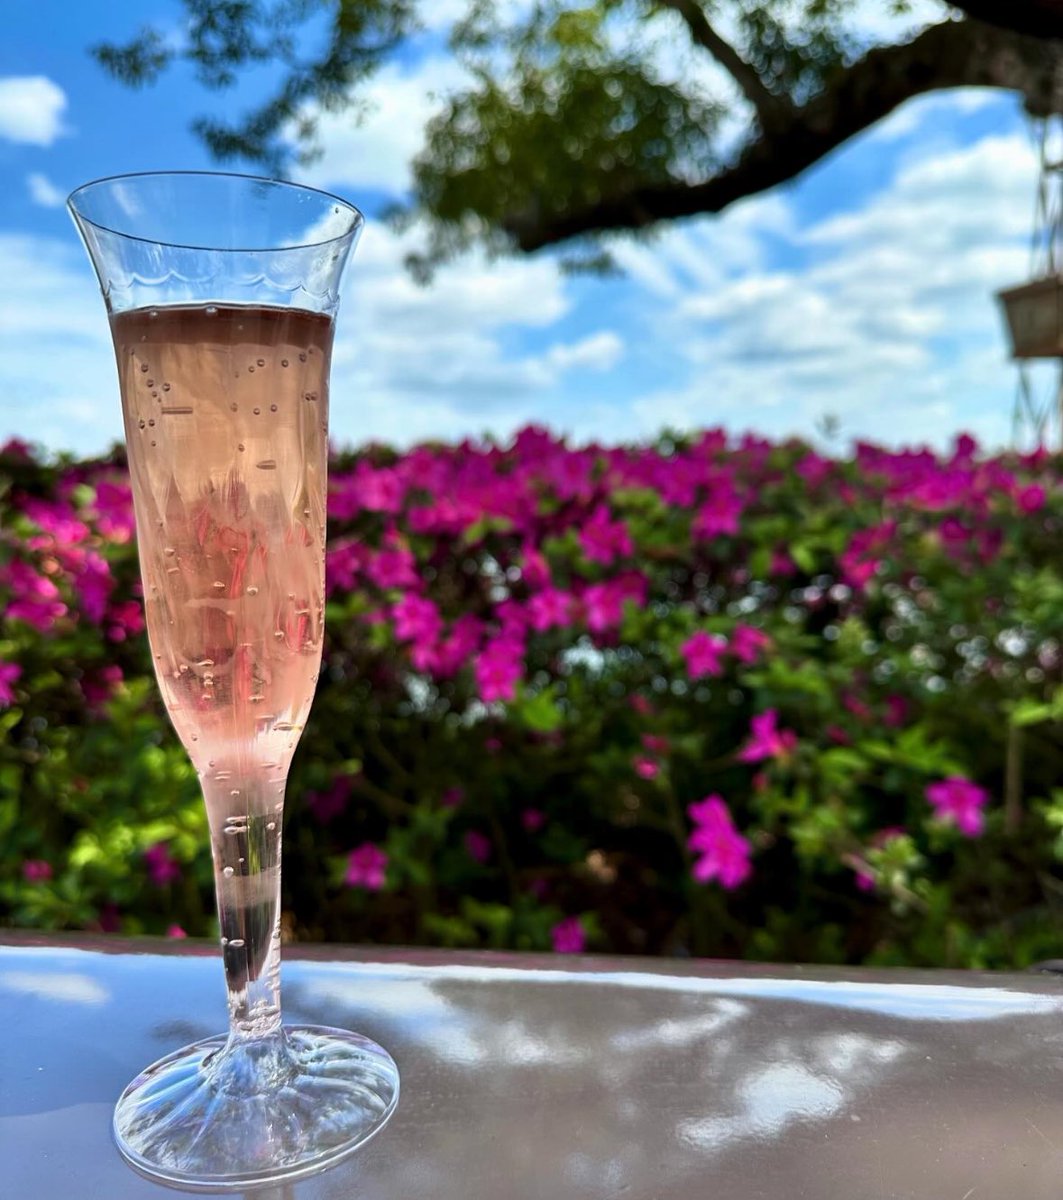 Sweet and simple: sparkling wine with a splash of Monin raspberry syrup from the France Pavilion at the #EPCOT Flower and Garden Festival. Light and refreshing. #sparklingwine #holidaydrinks #france #wine #moninsyrup #monin